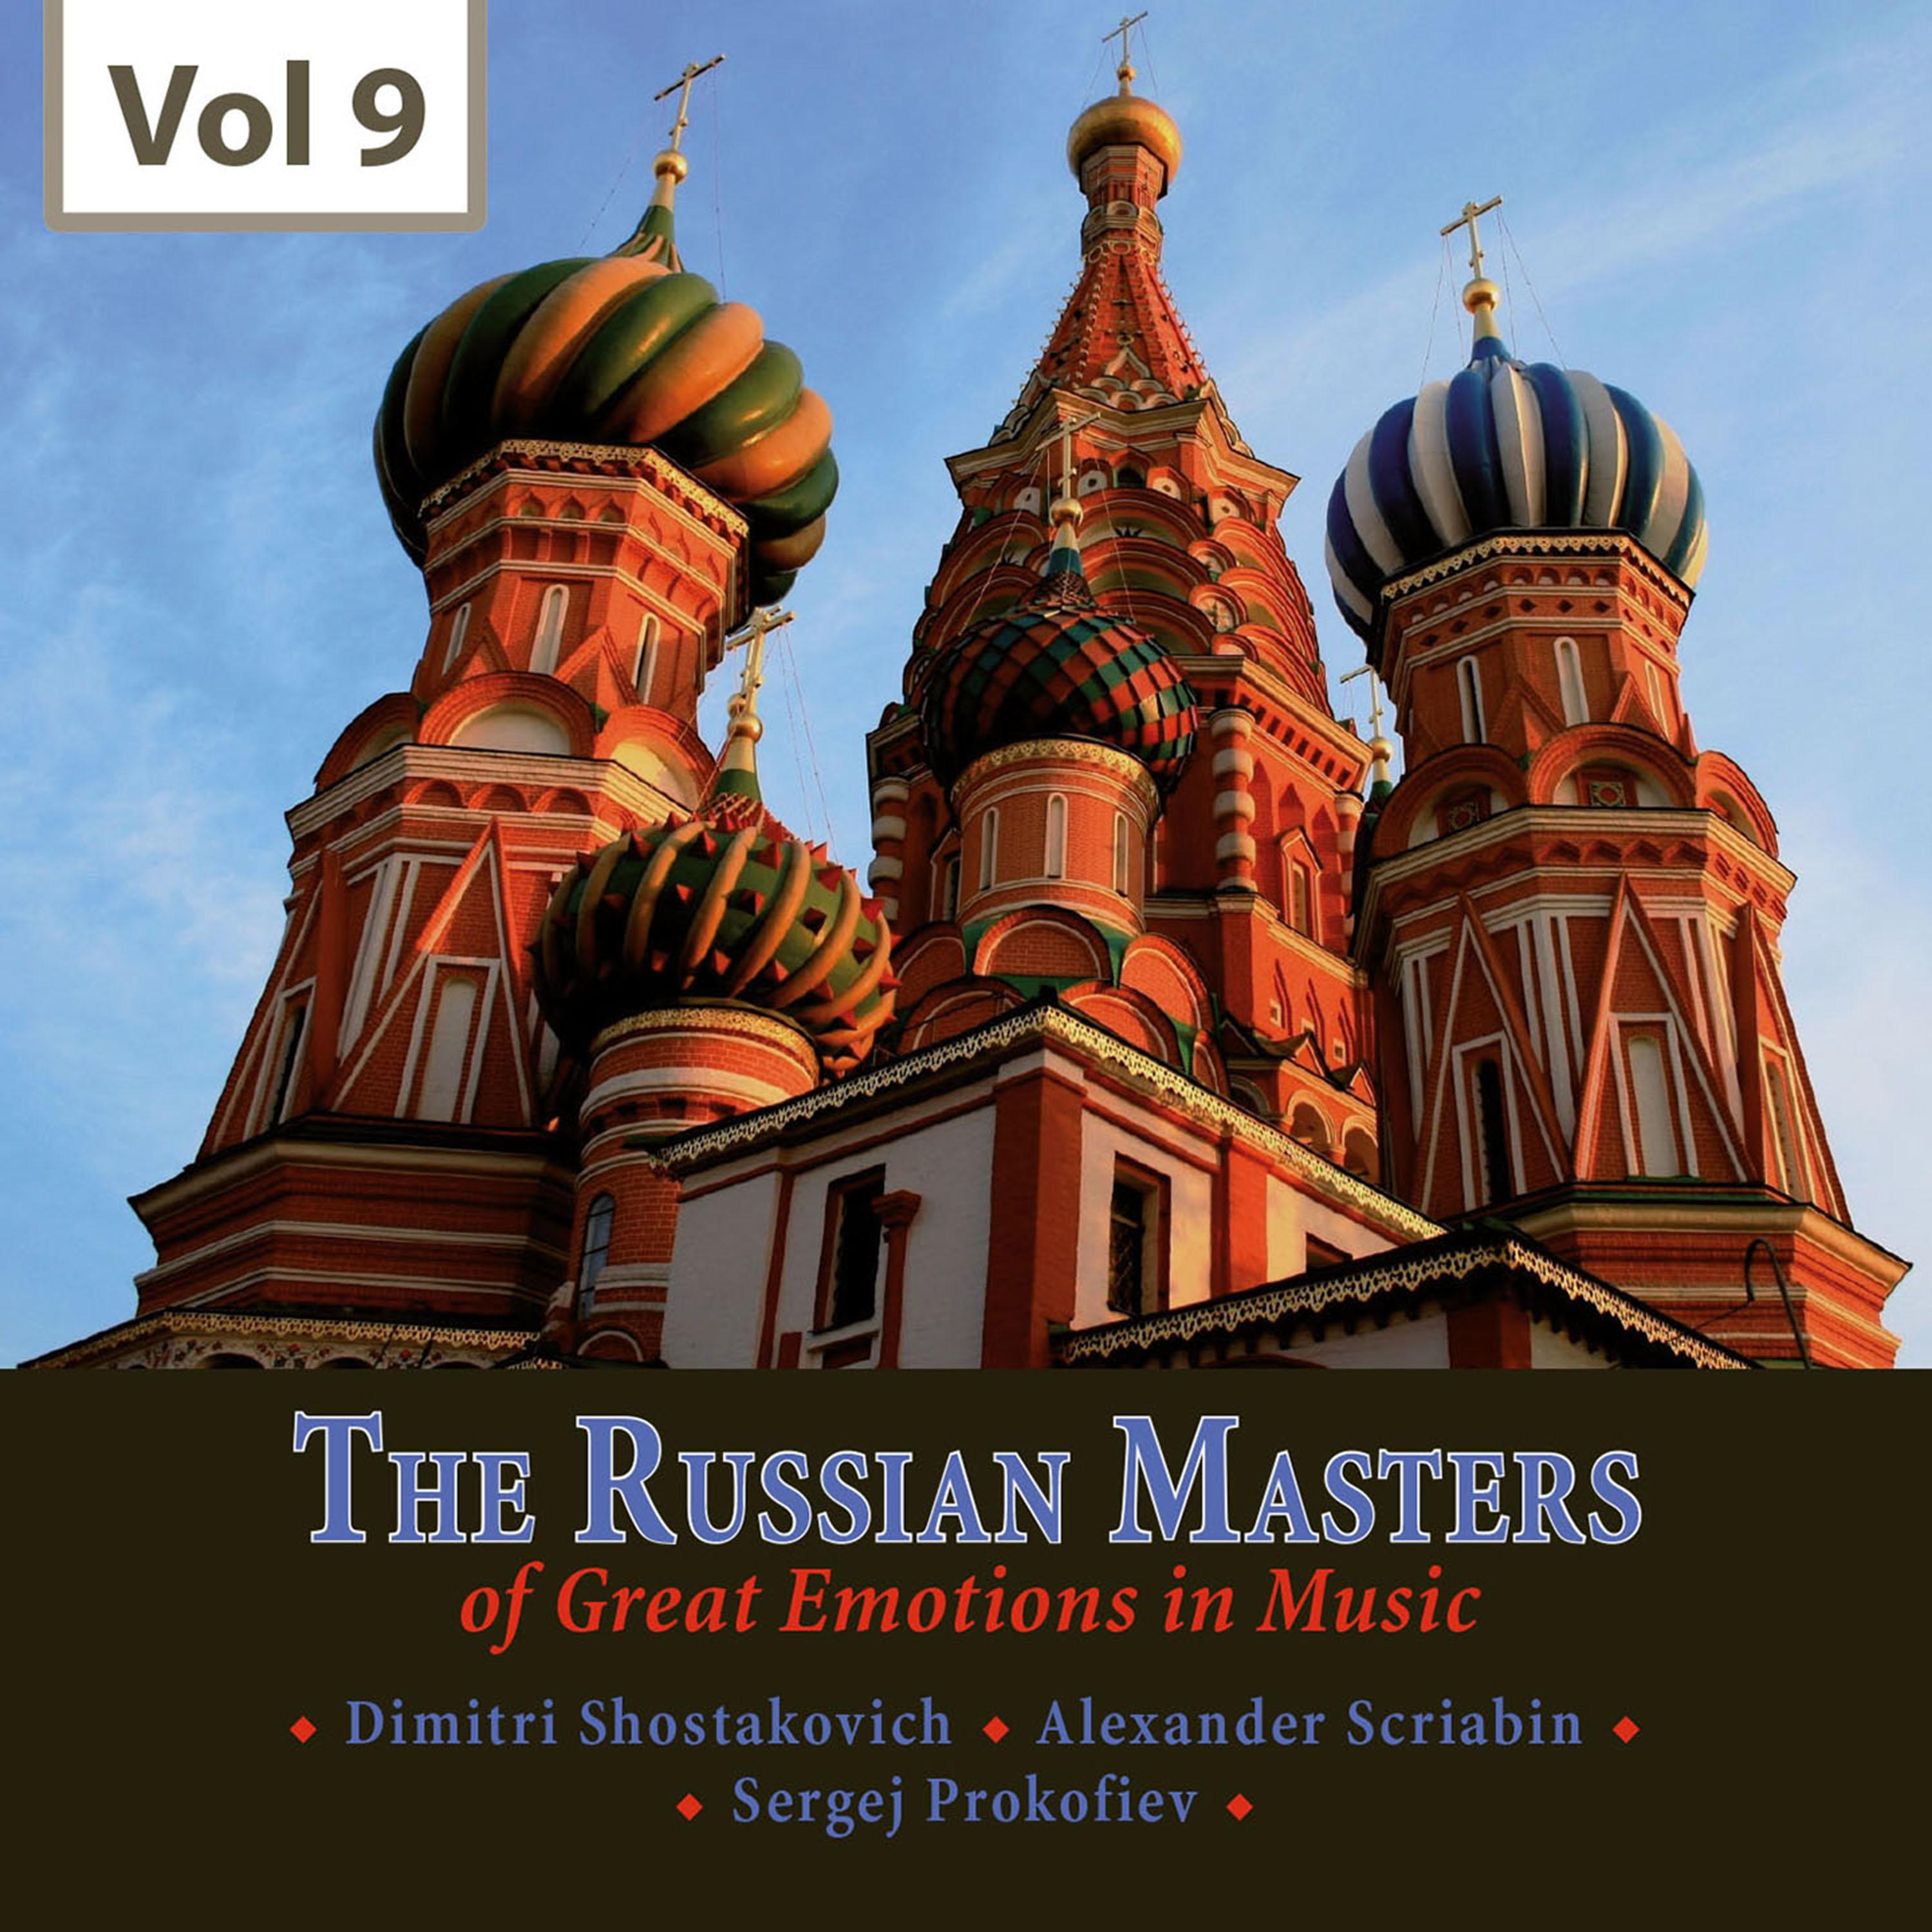 The Russian Masters in Music, Vol. 9